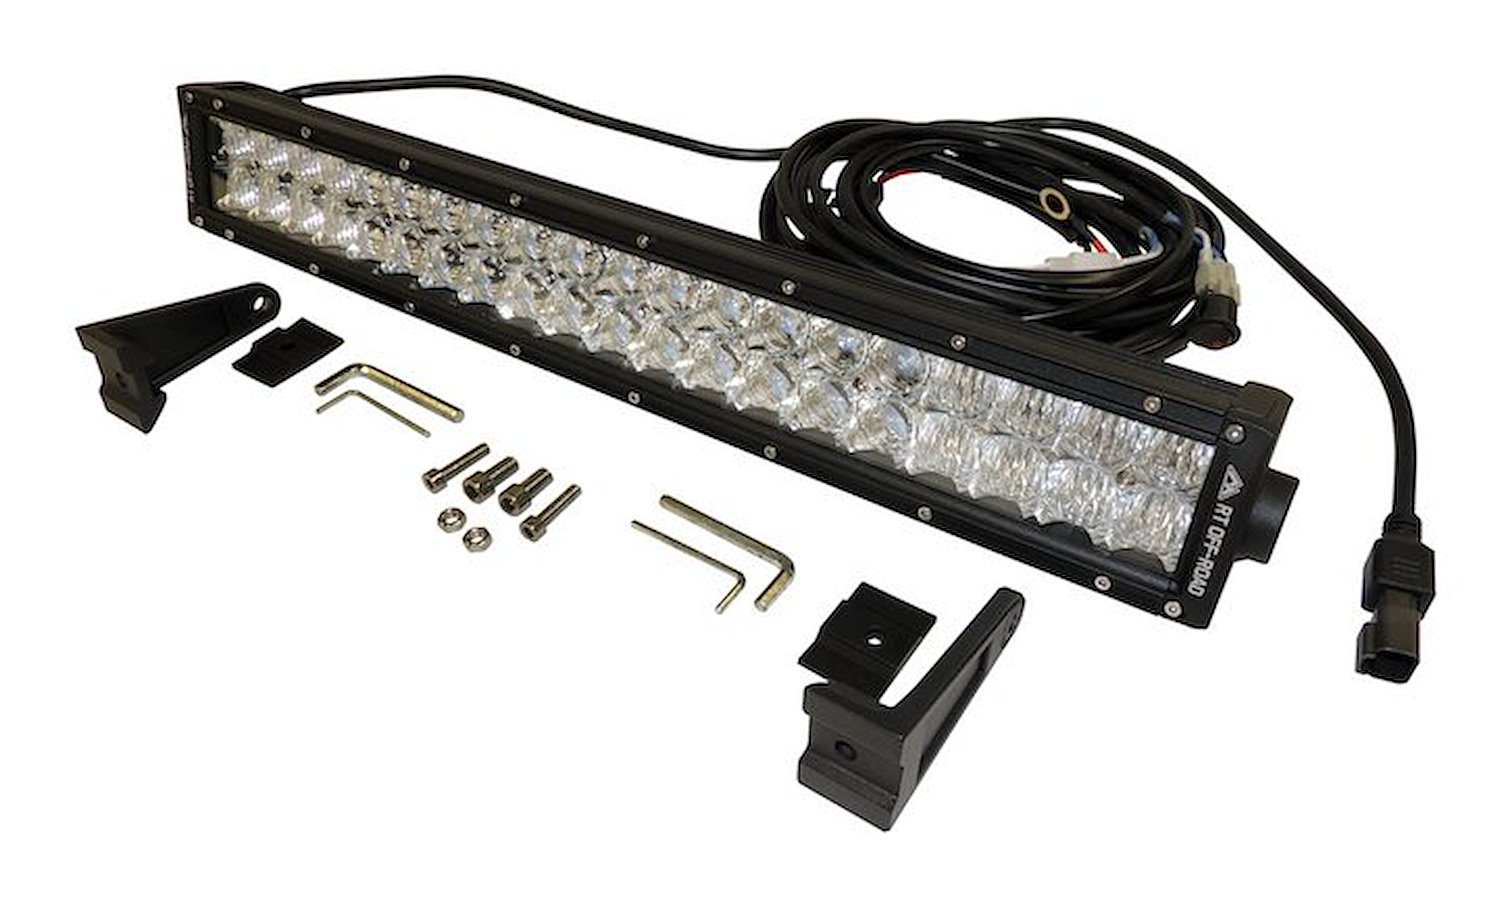 RT28083 21.5" LED Light Bar w/ Mounting Brackets & Wiring Harness for All Models;Features Flood & Spot Optics